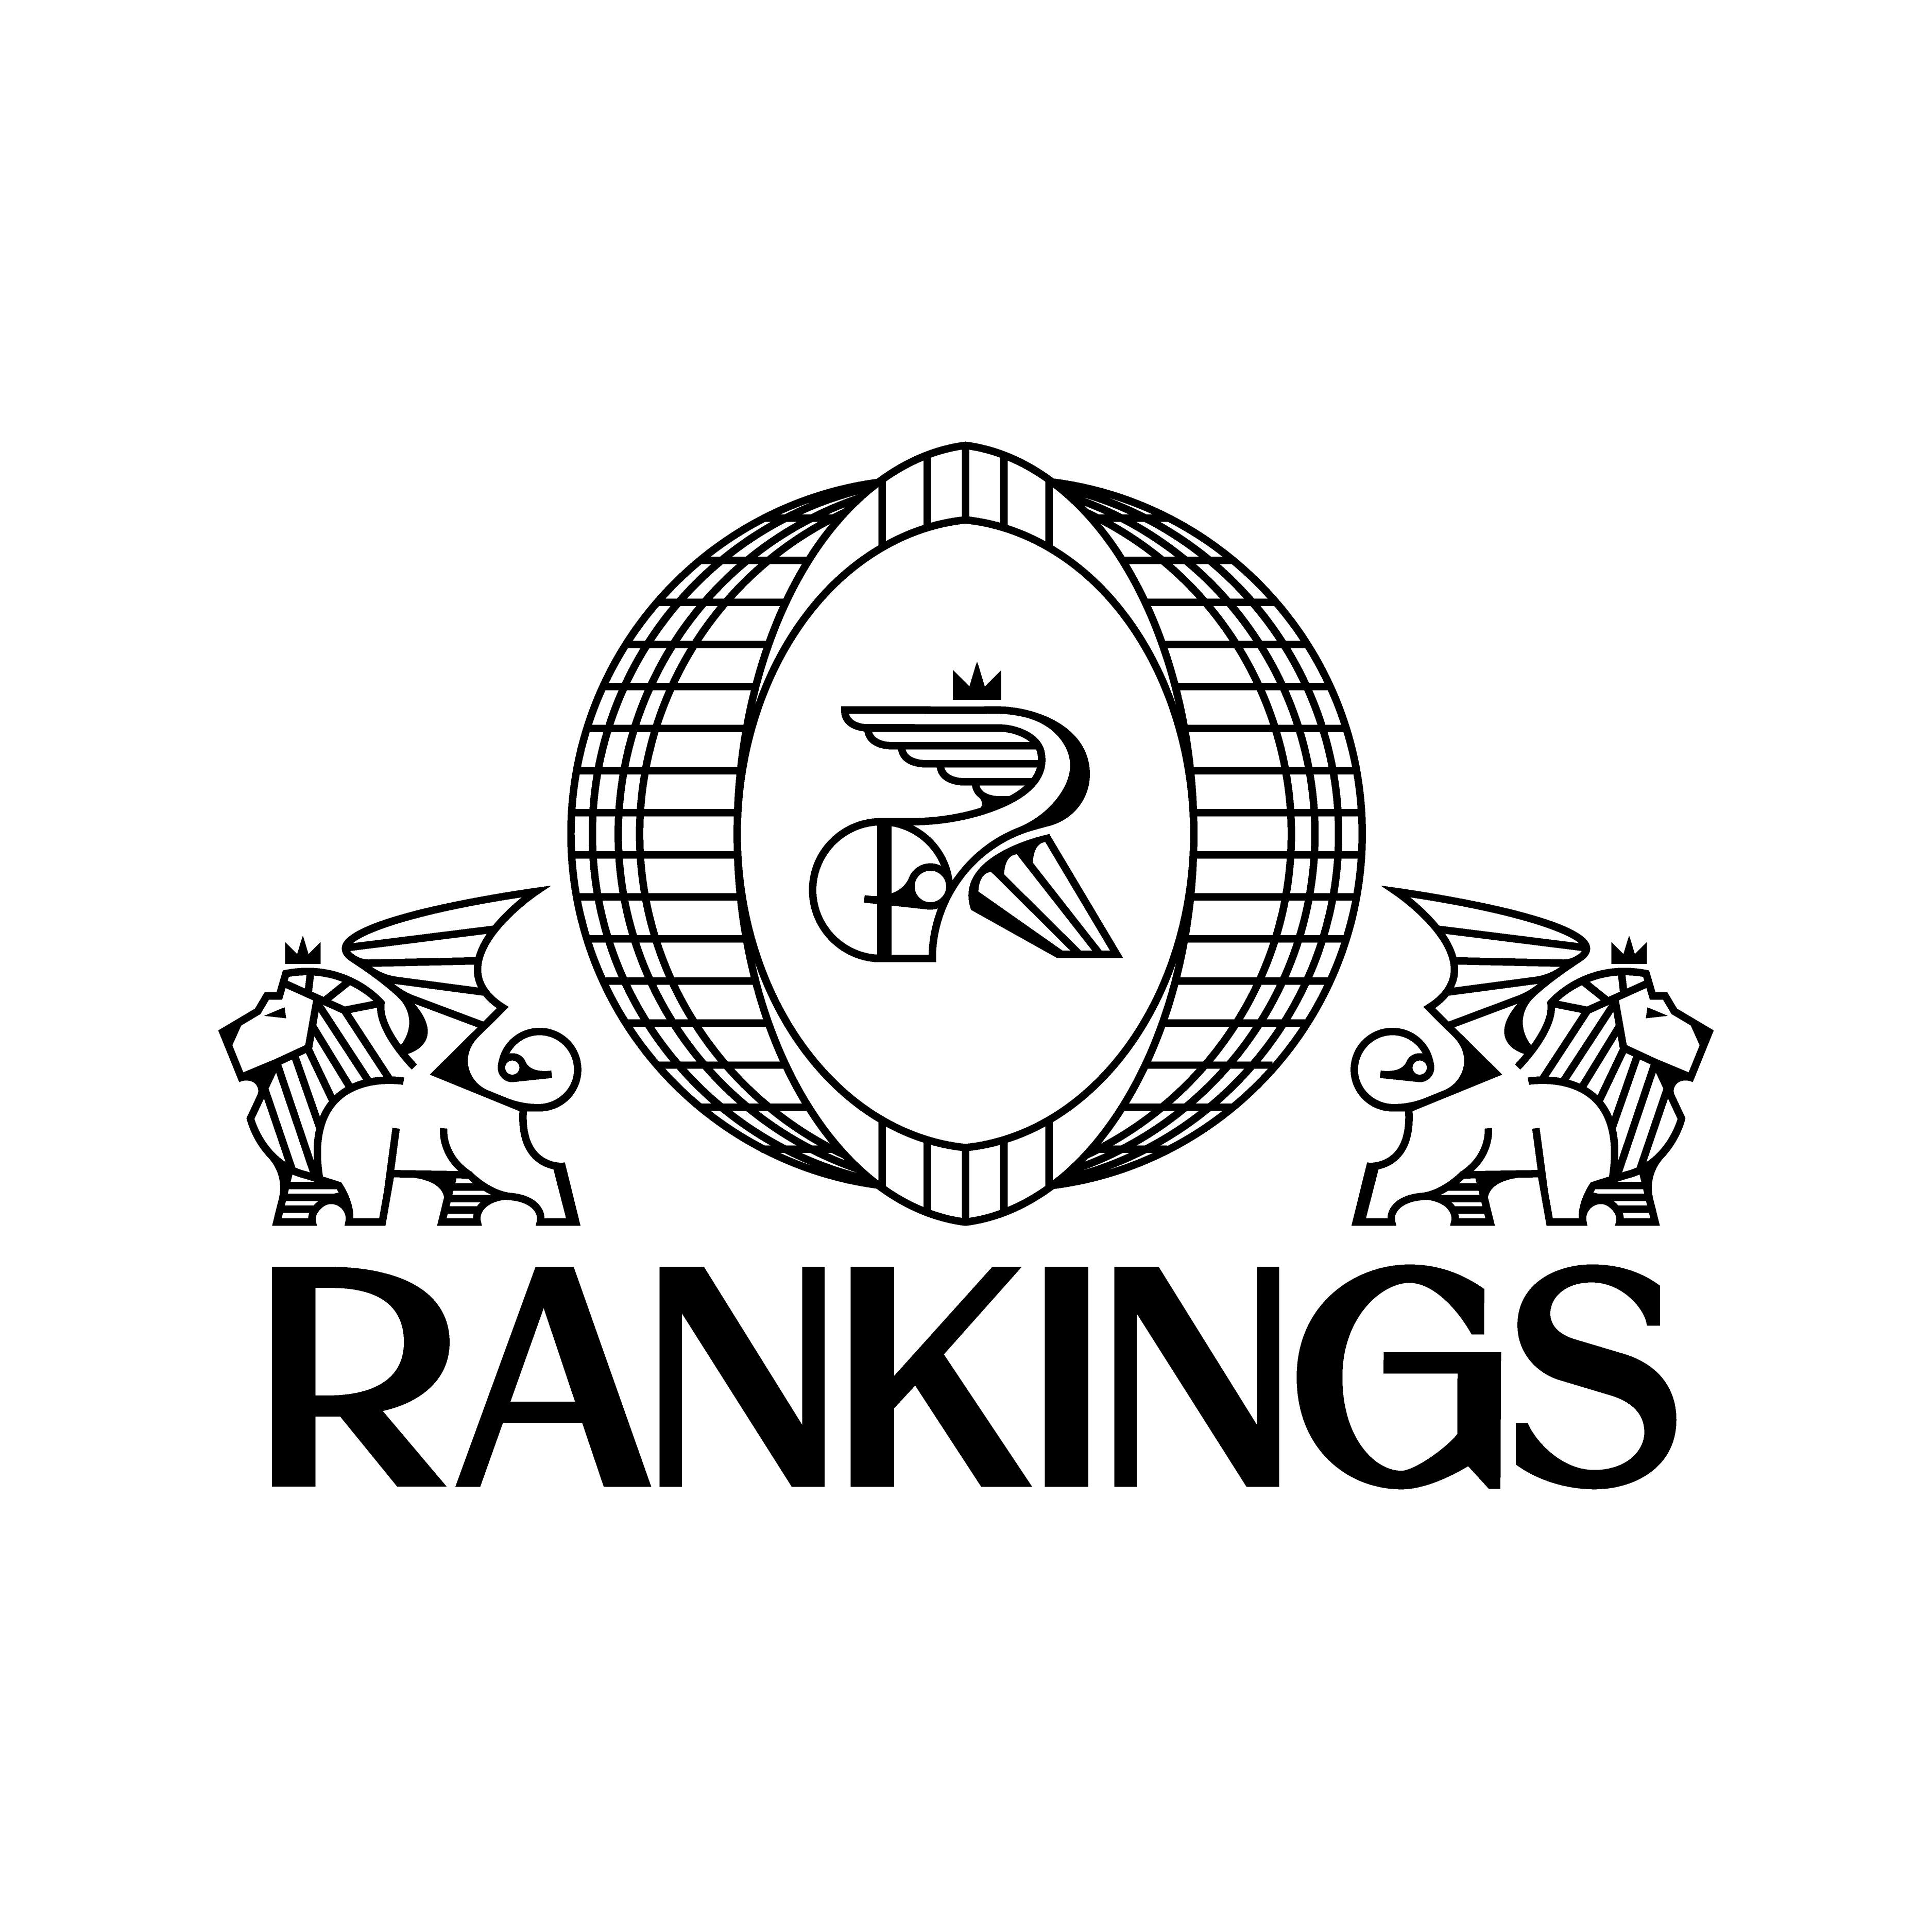 Rankings Crest  logo design by logo designer Logarhythm Creative for your inspiration and for the worlds largest logo competition